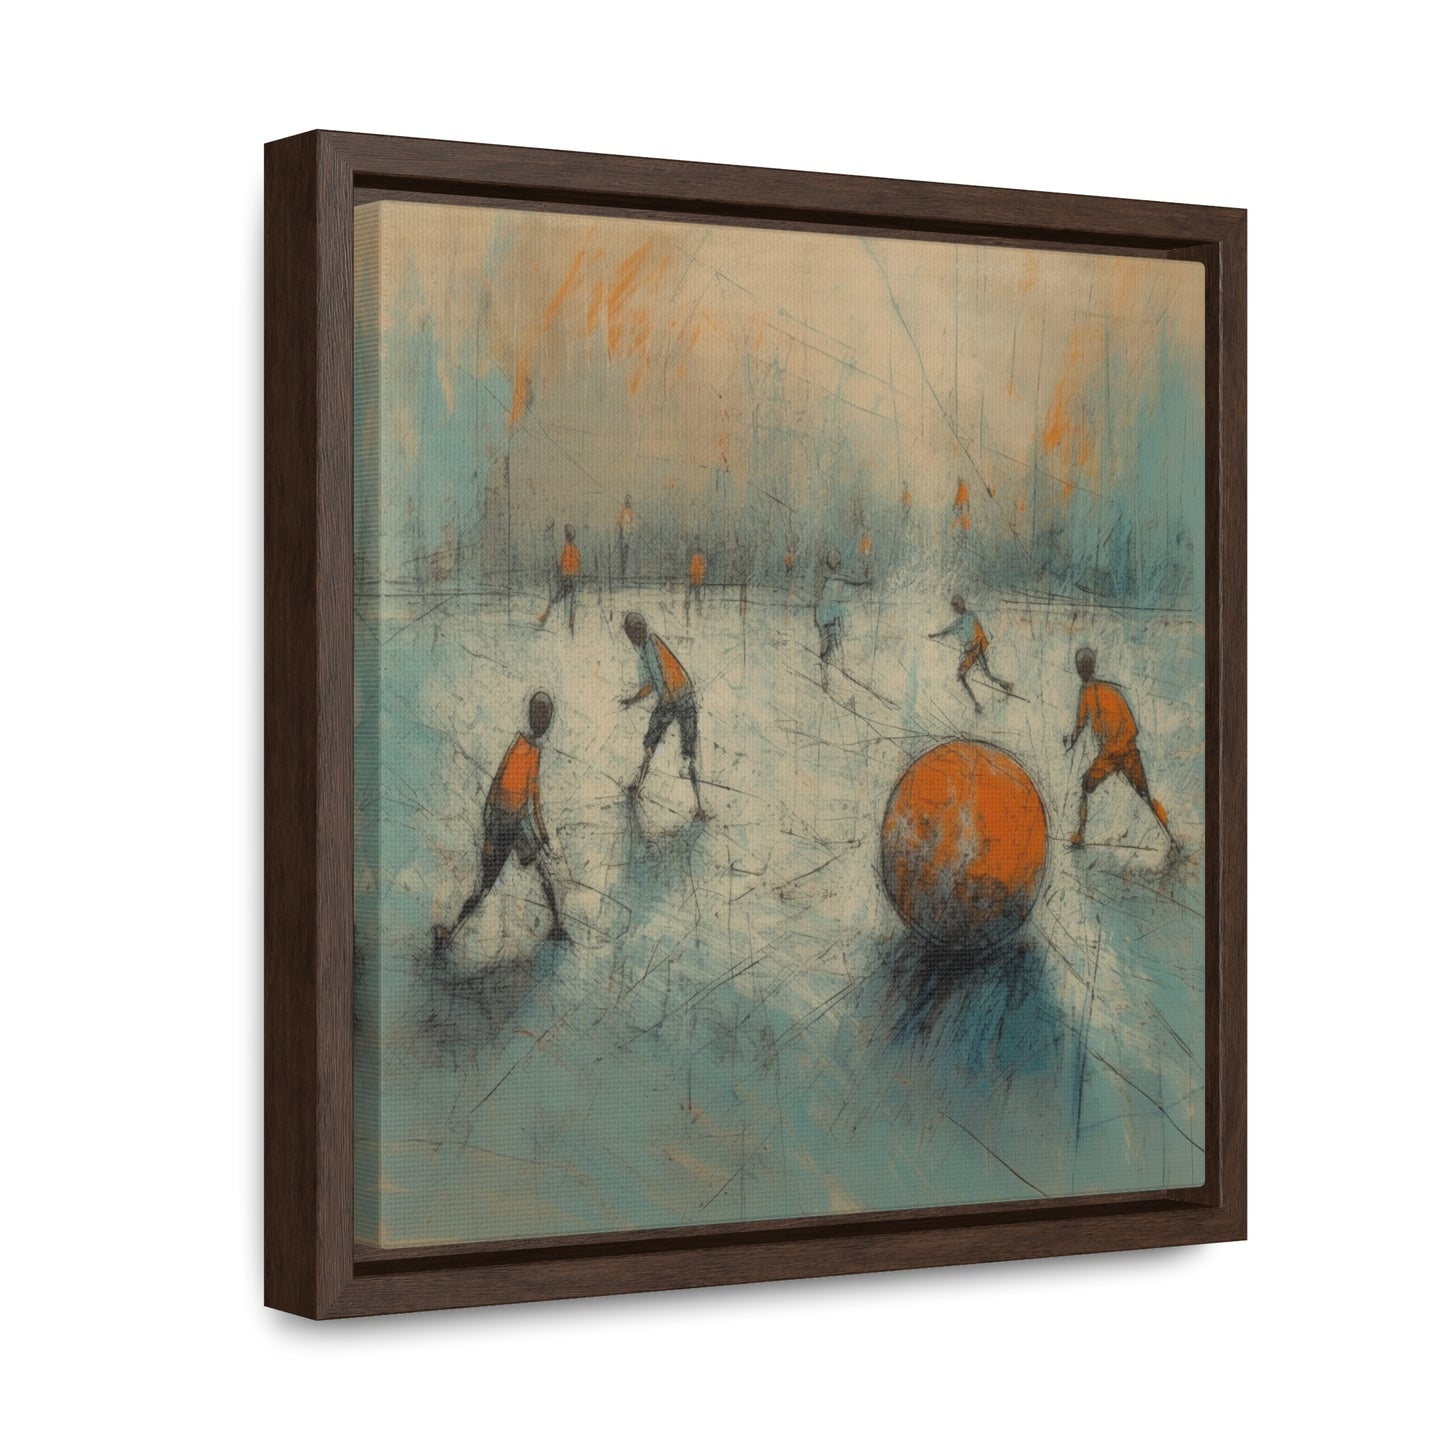 Childhood 15, Gallery Canvas Wraps, Square Frame